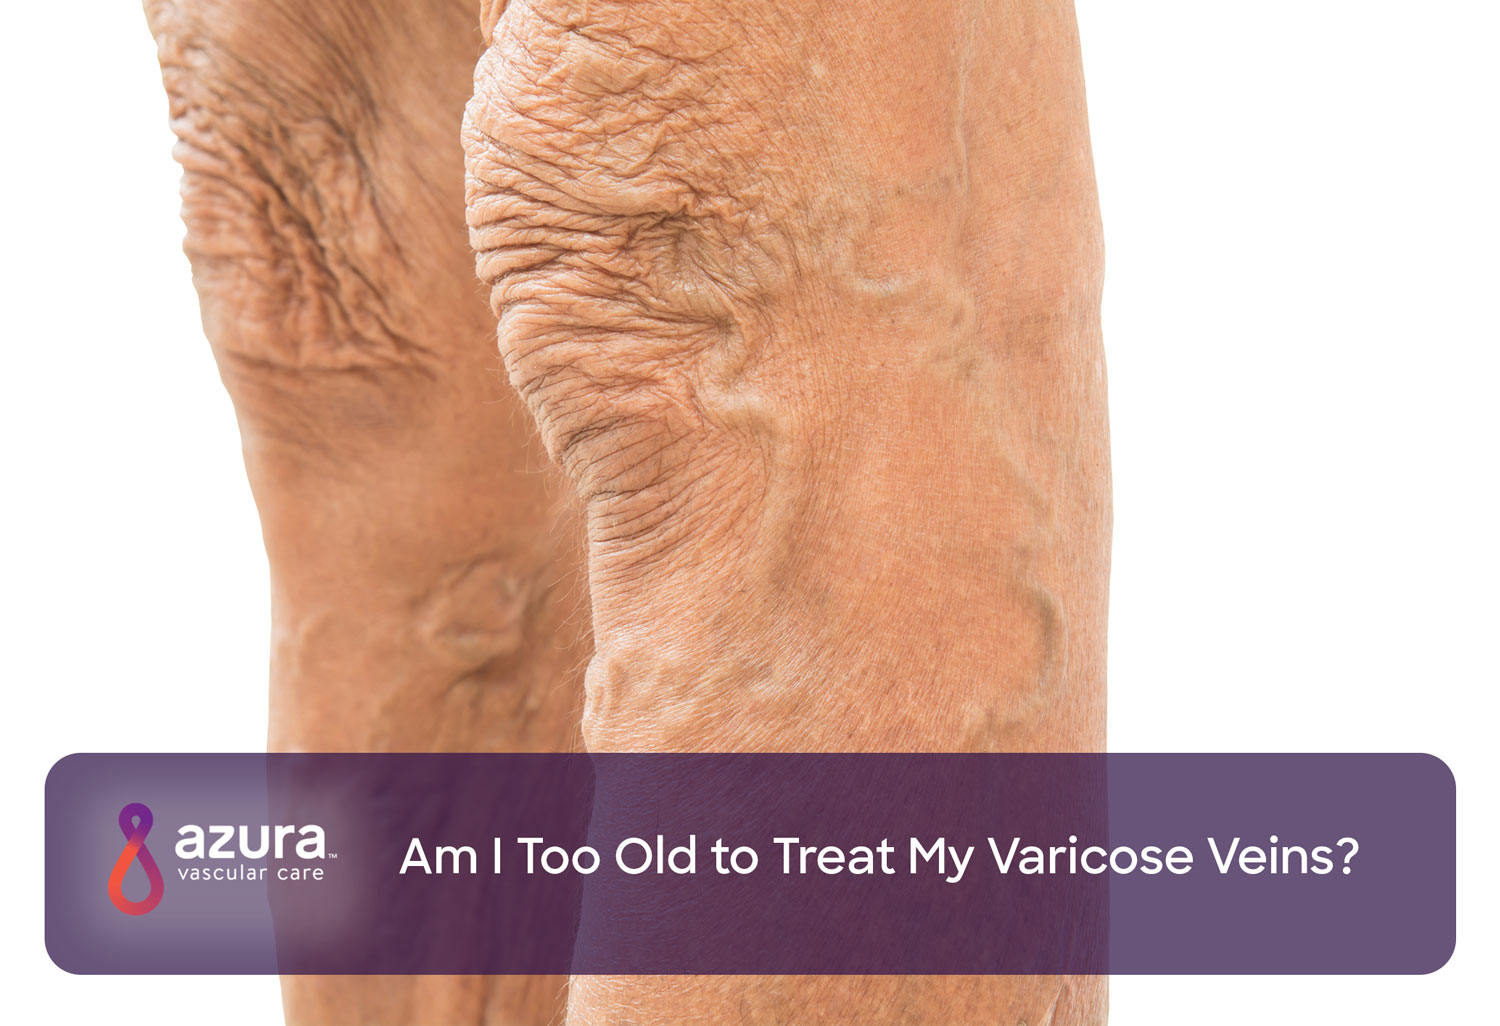 Occupations Most at Risk for Varicose Veins - How to Help